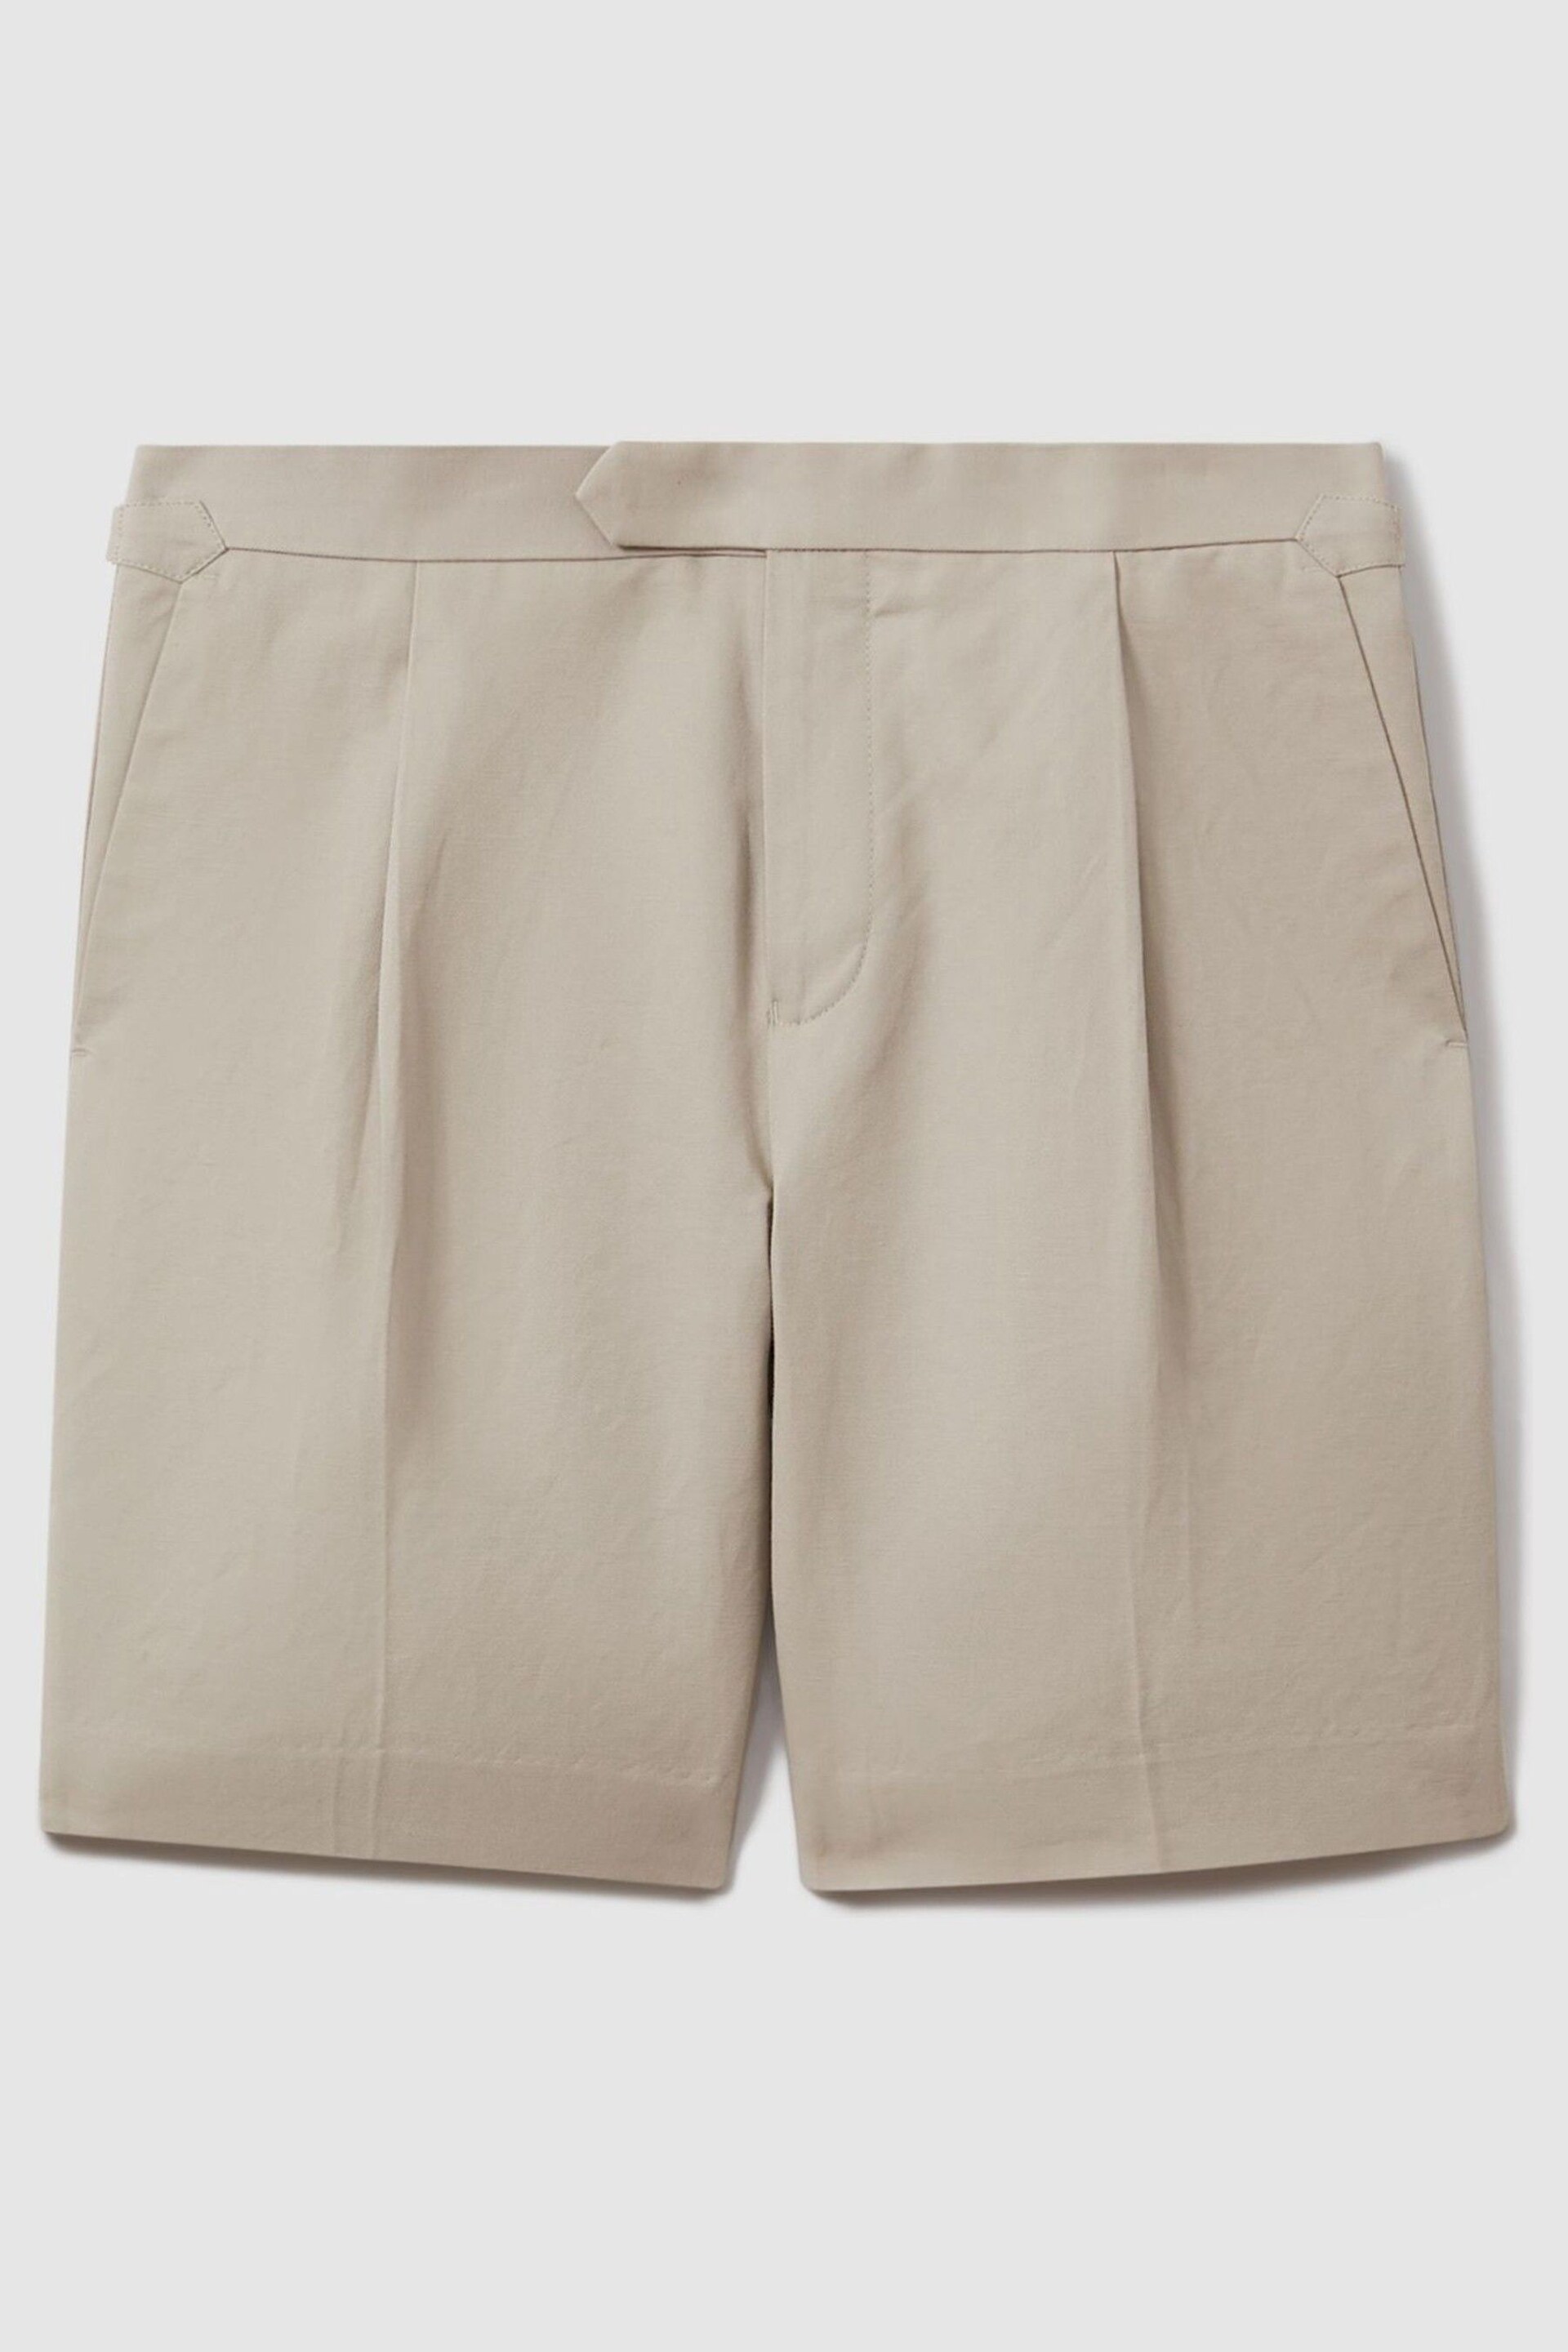 Reiss Stone Con Cotton Blend Adjuster Shorts - Image 2 of 5